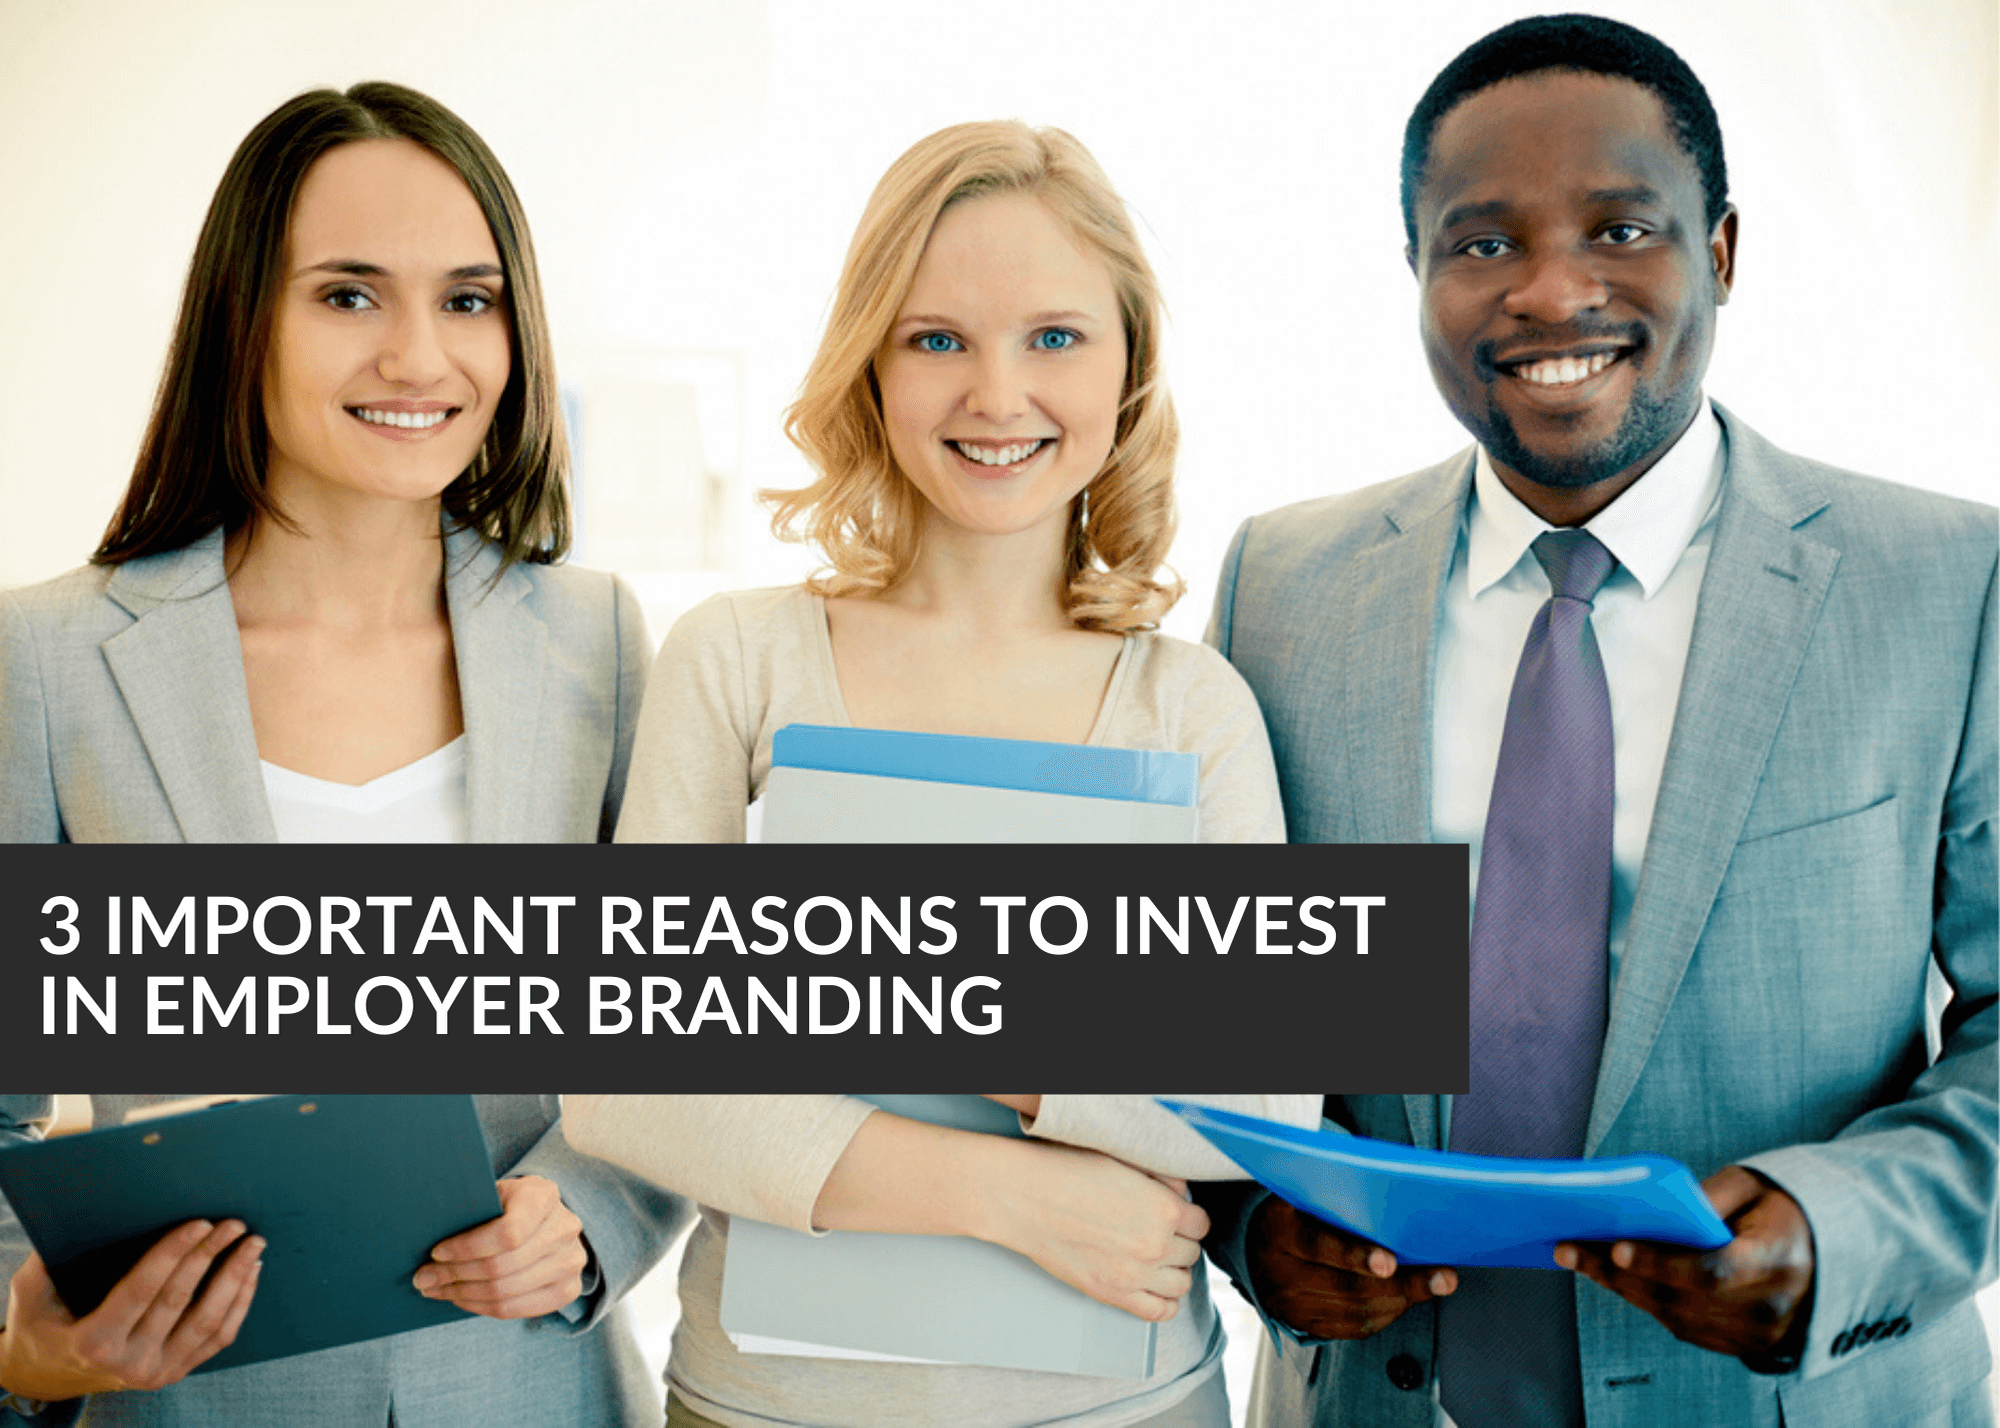 3 Important Reasons To Invest In Employer Branding